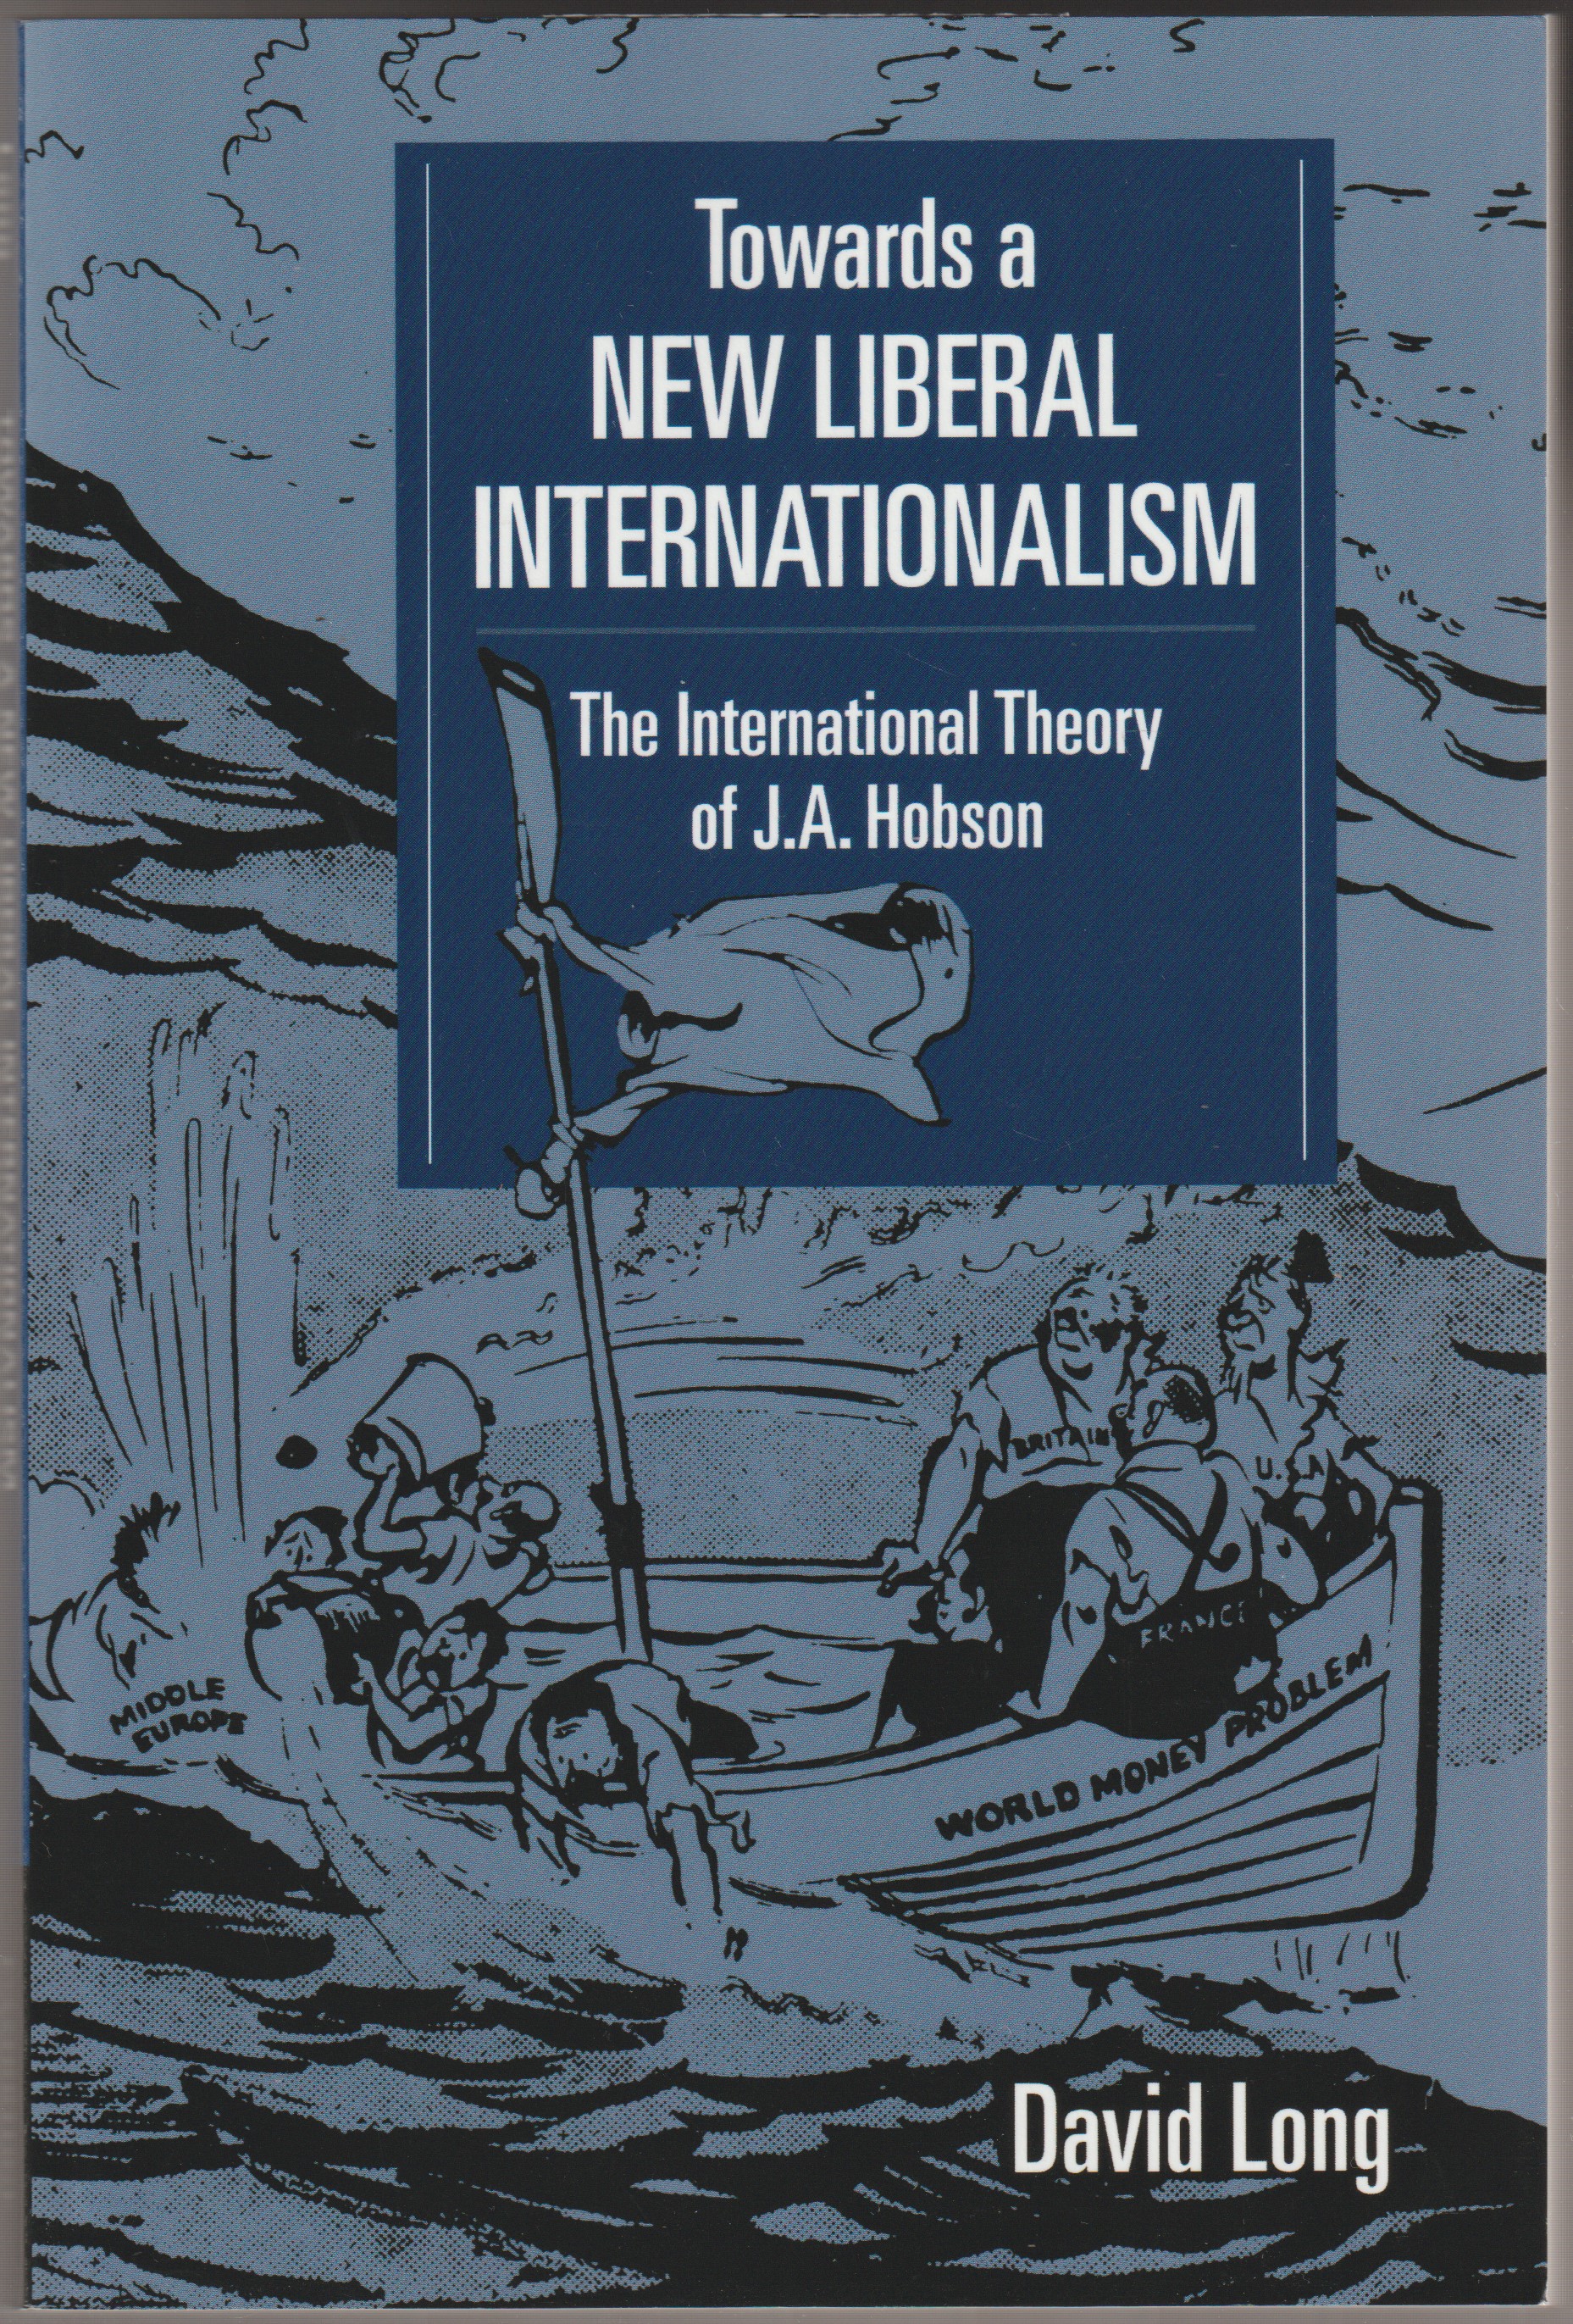 Towards a new liberal internationalism : the international theory of J.A. Hobson.